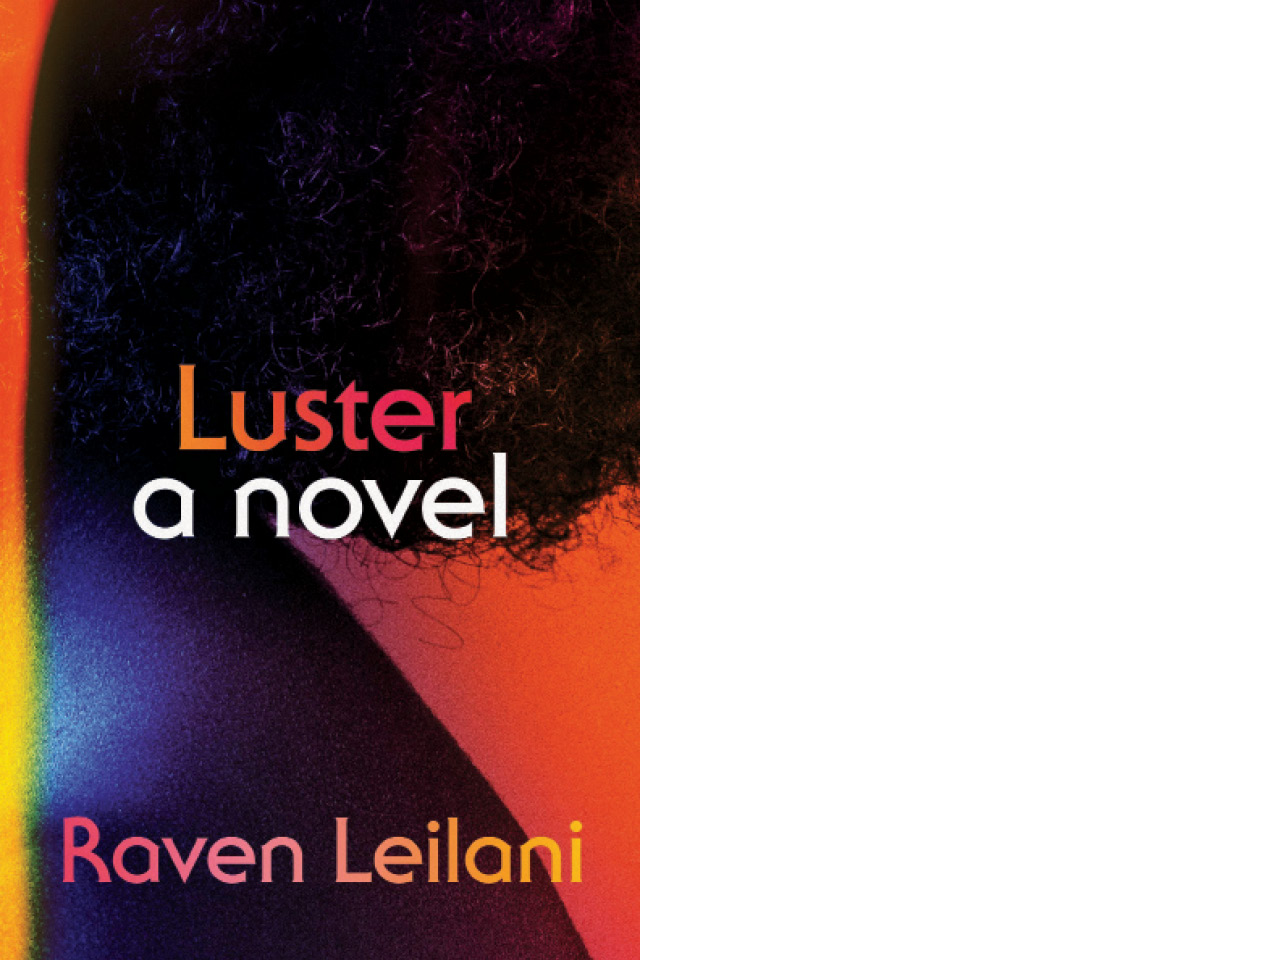 The cover of Luster